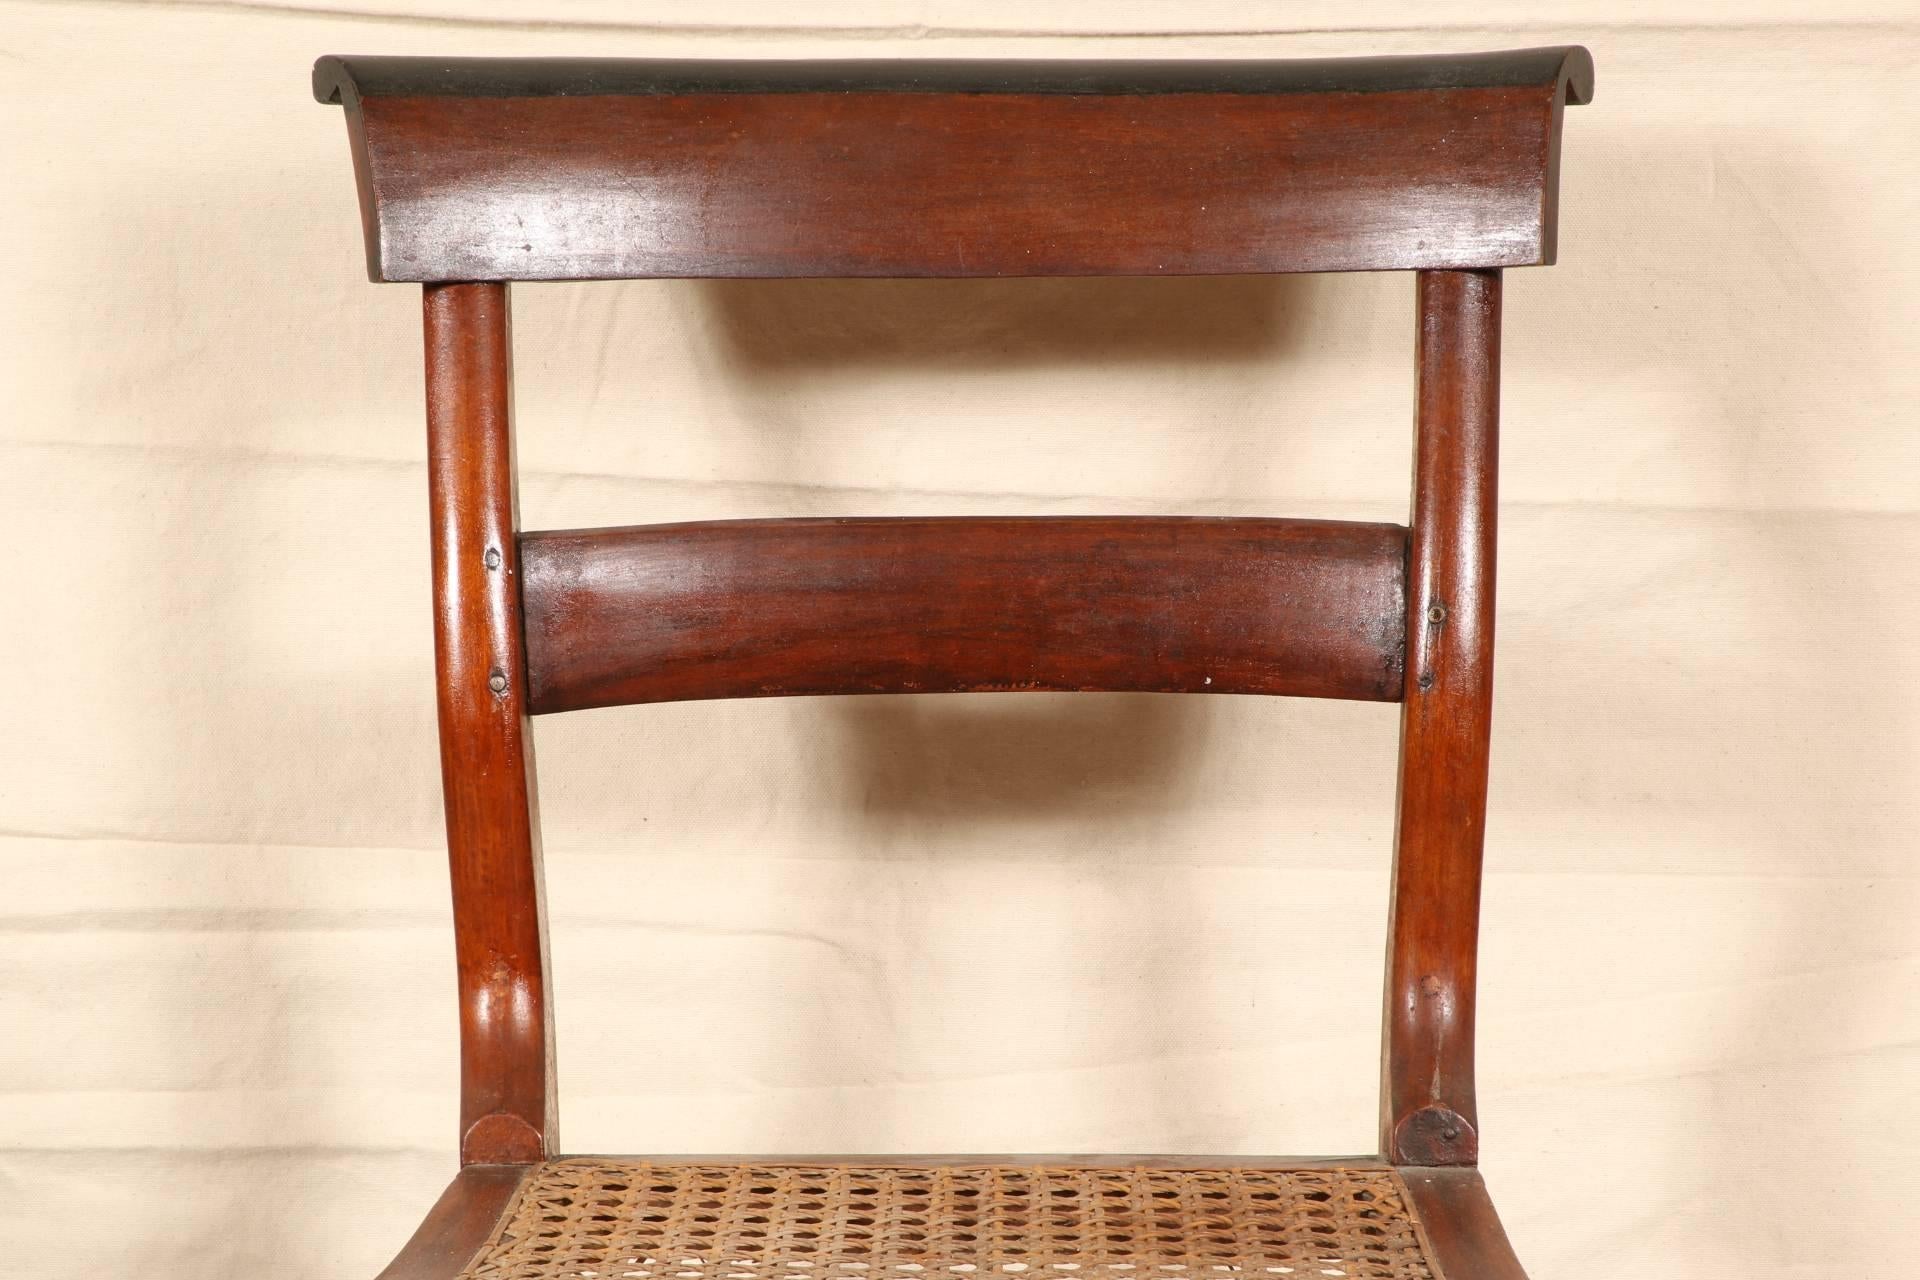 In brown with ebonized crest rails and caned seats, double side stretchers and single ones front and back.
Condition: Good overall with some wear to the finishes.